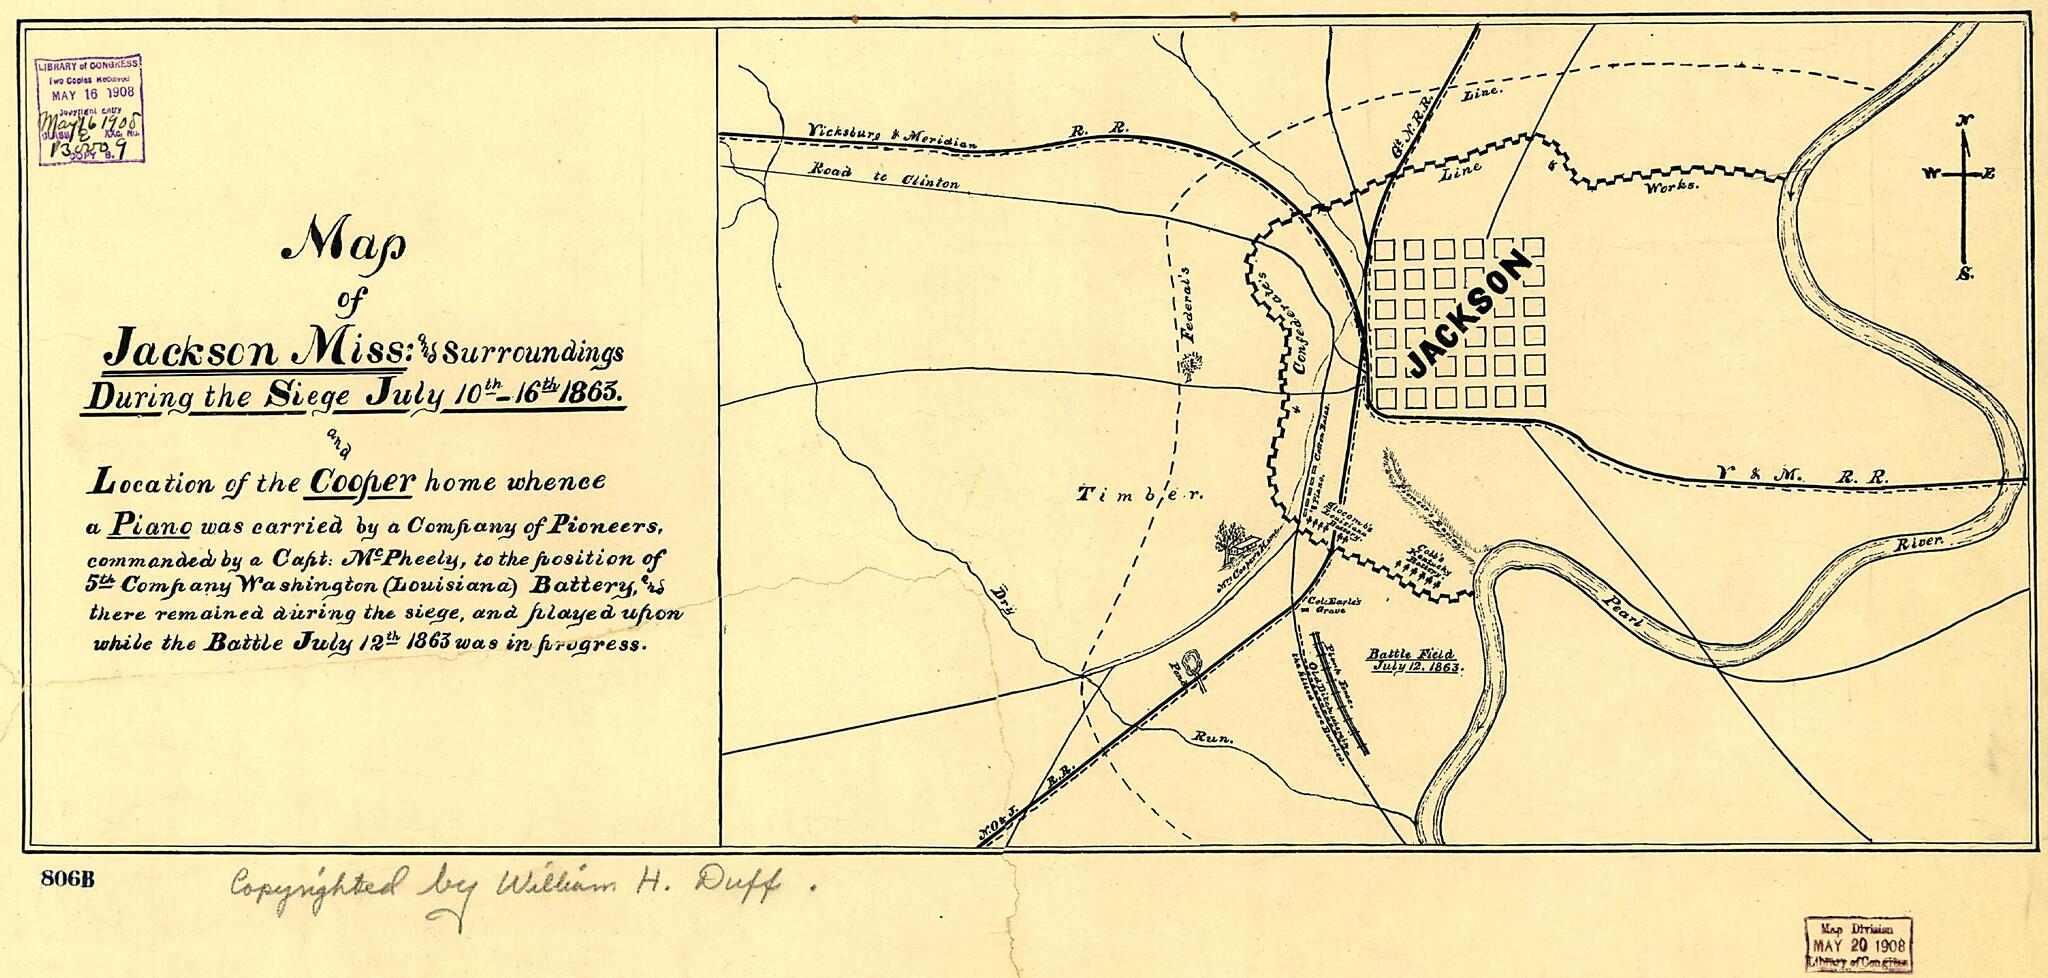 This old map of 16th, 1863, and Location of the Cooper Home Whence a Piano Was Carried by a Company of Pioneers, Commanded by a Capt: McPheely, to the Position of 5th Company, Washington (Louisiana) Battery, and There Remained During the Siege, and Playe